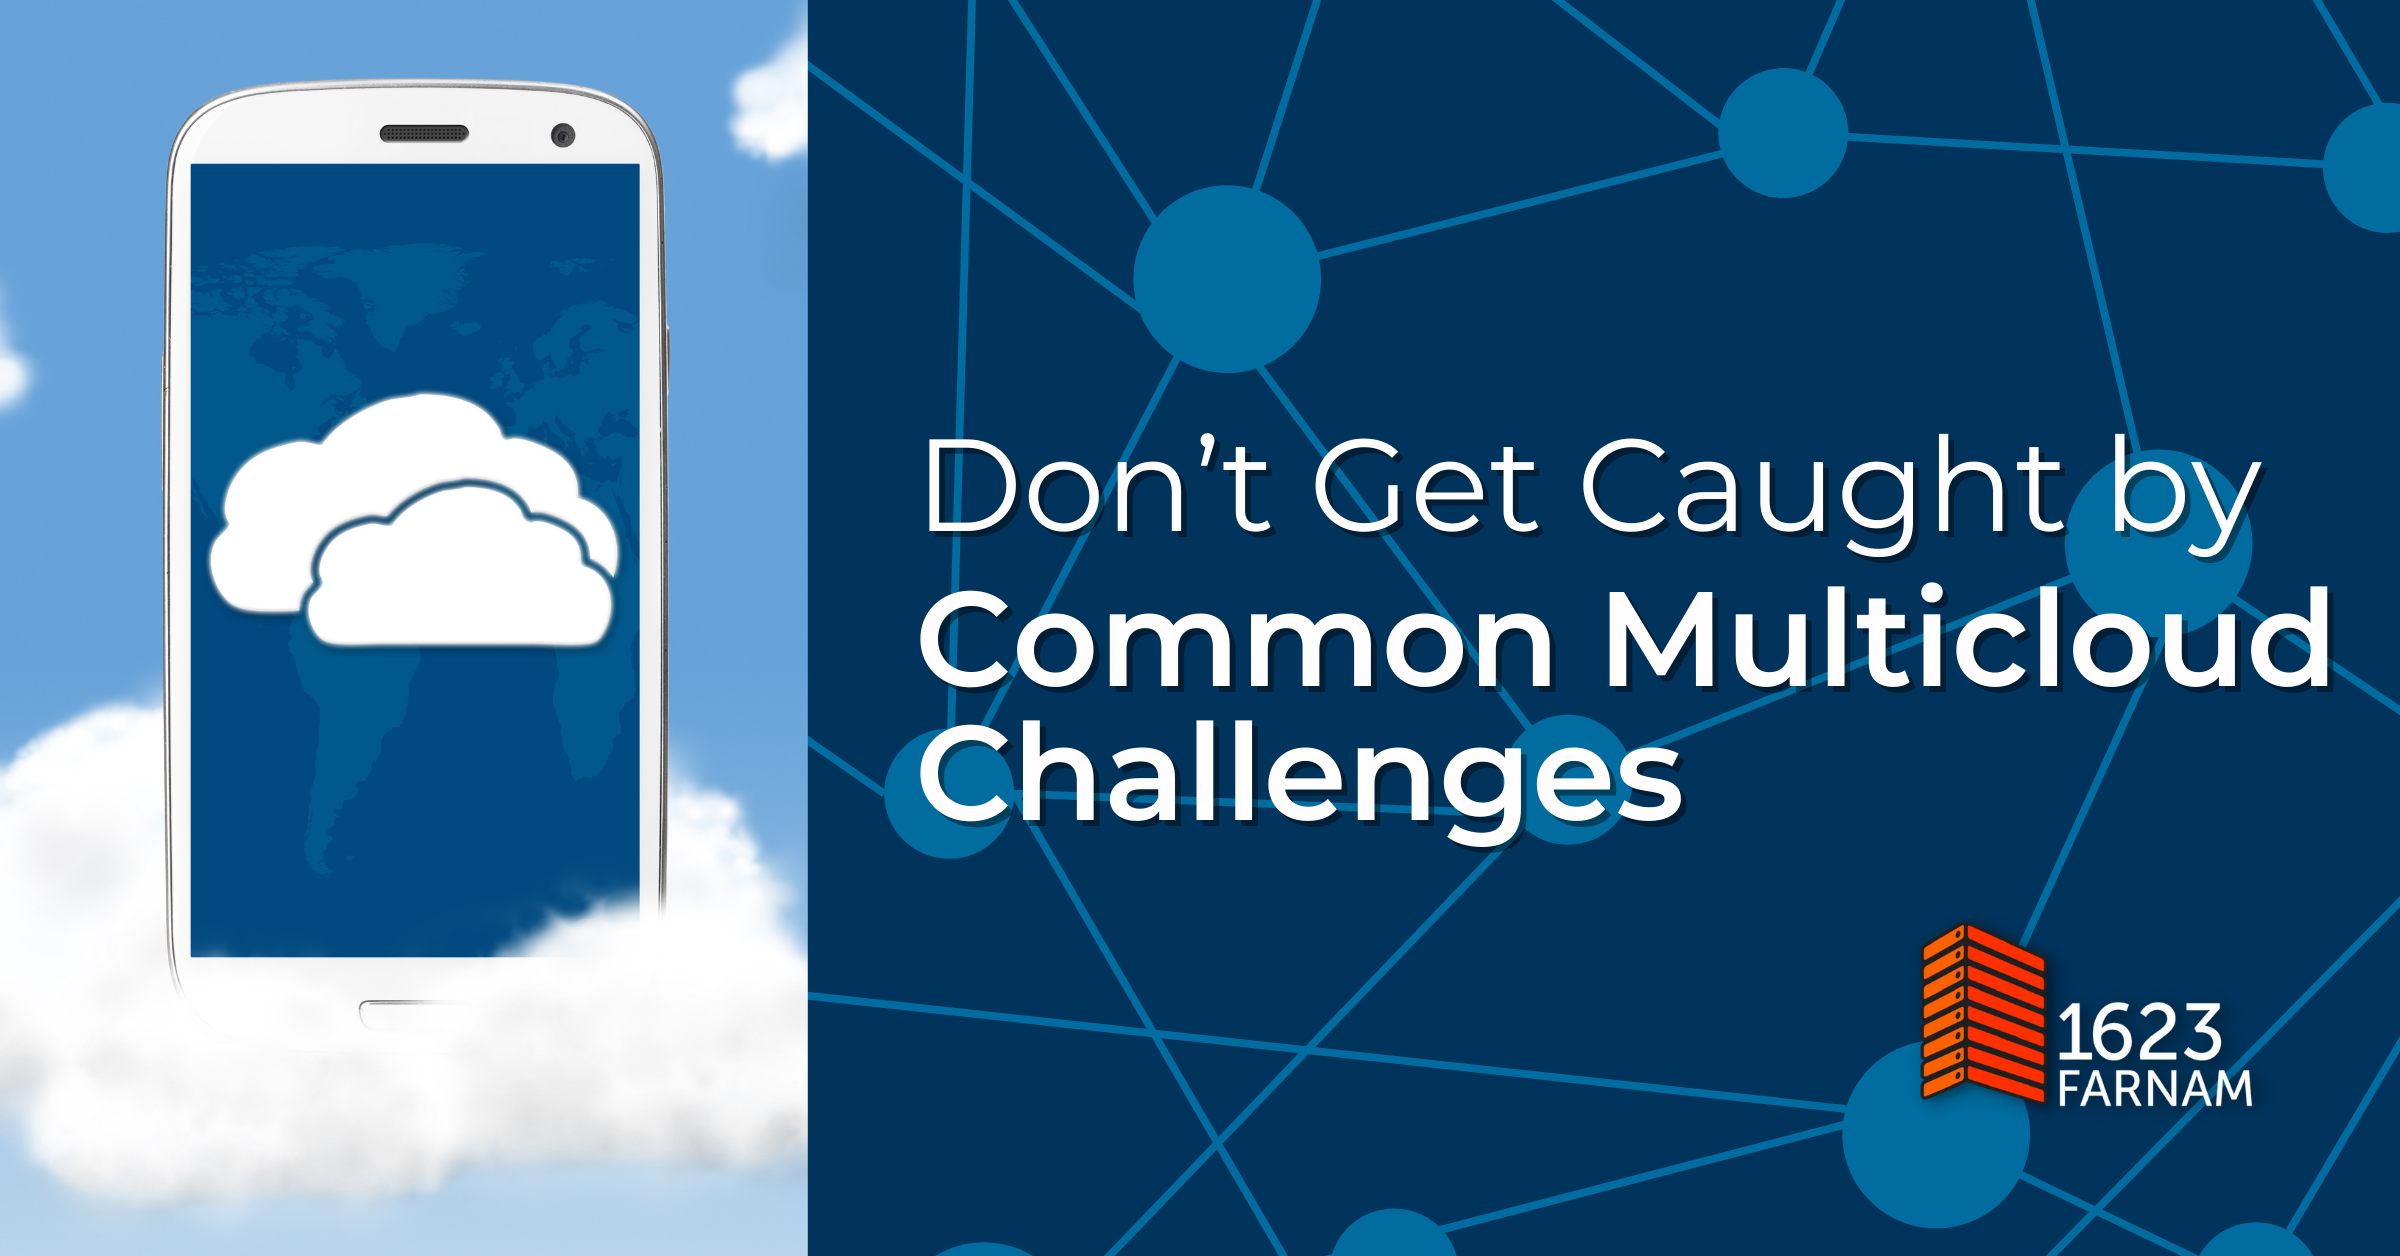 Don’t Get Caught by These Common Multicloud Challenges